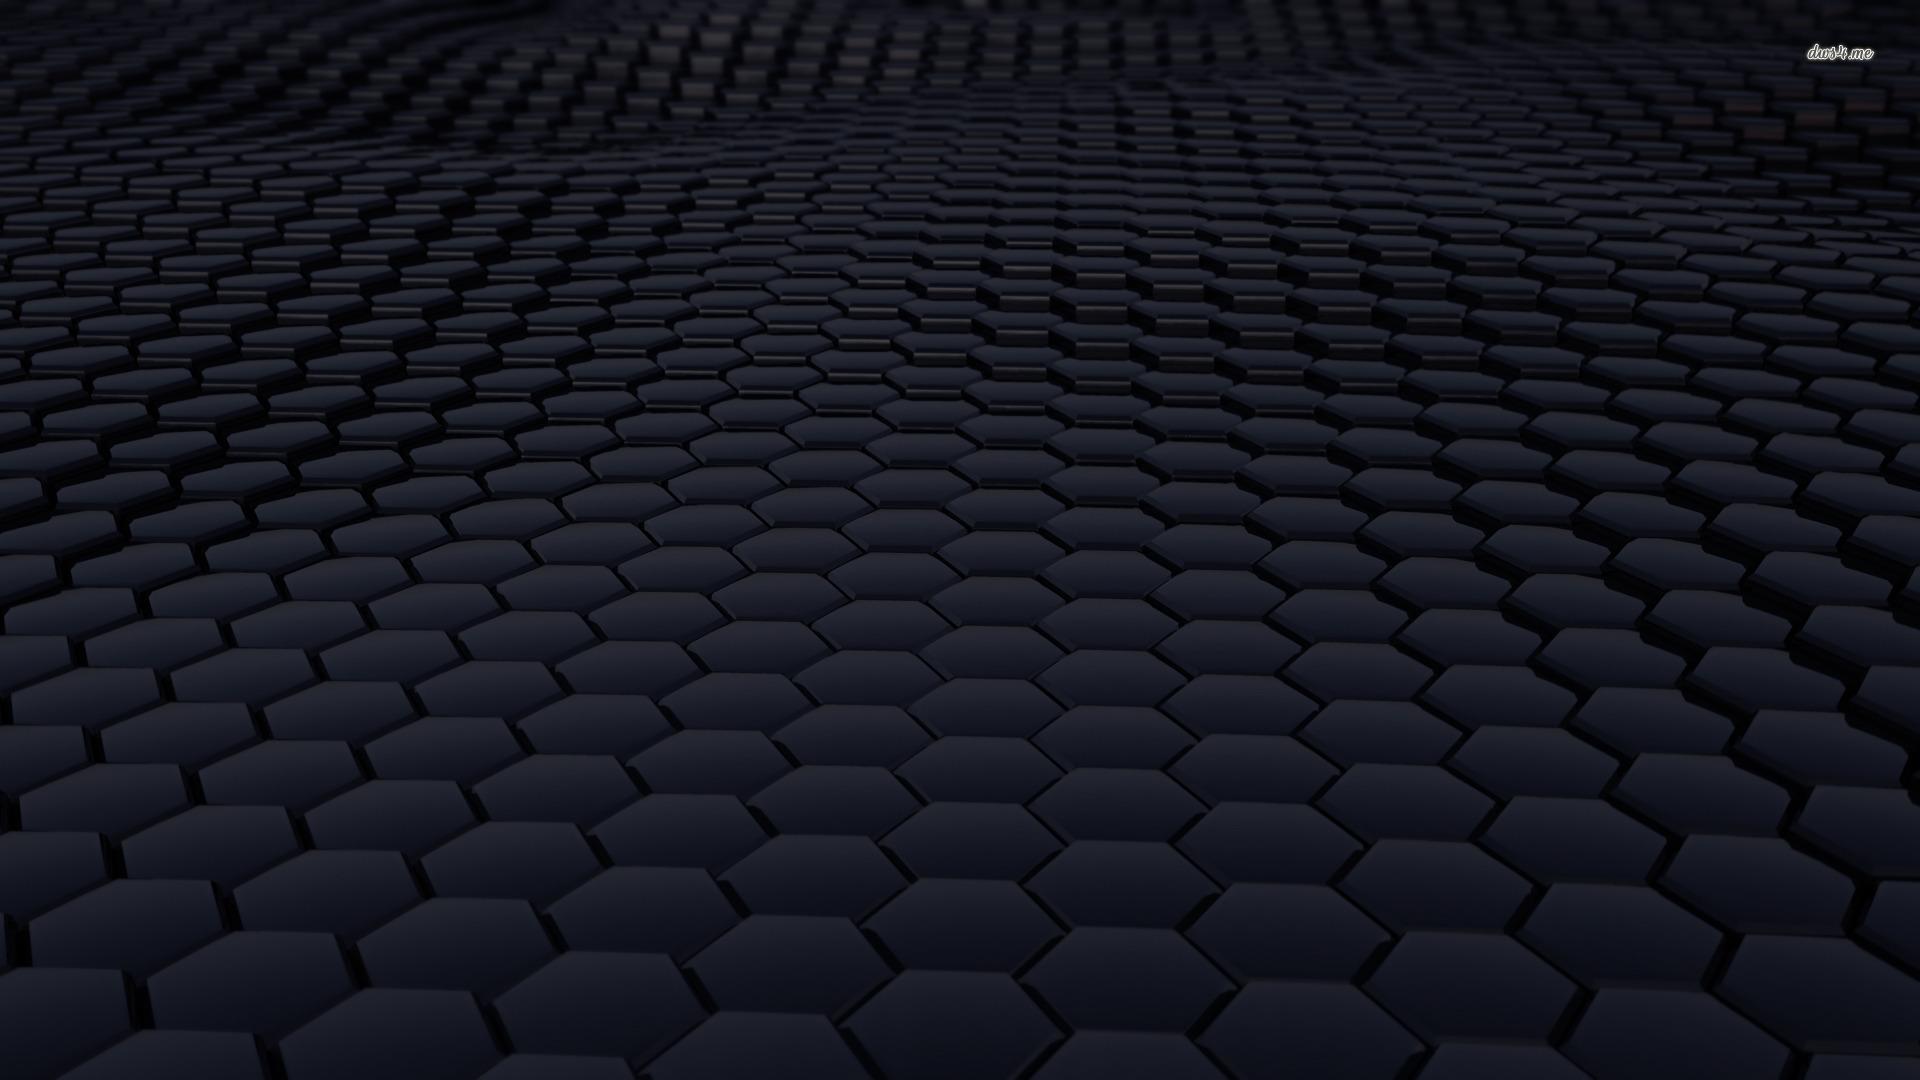 FHDQ Floor Background Picture for Free